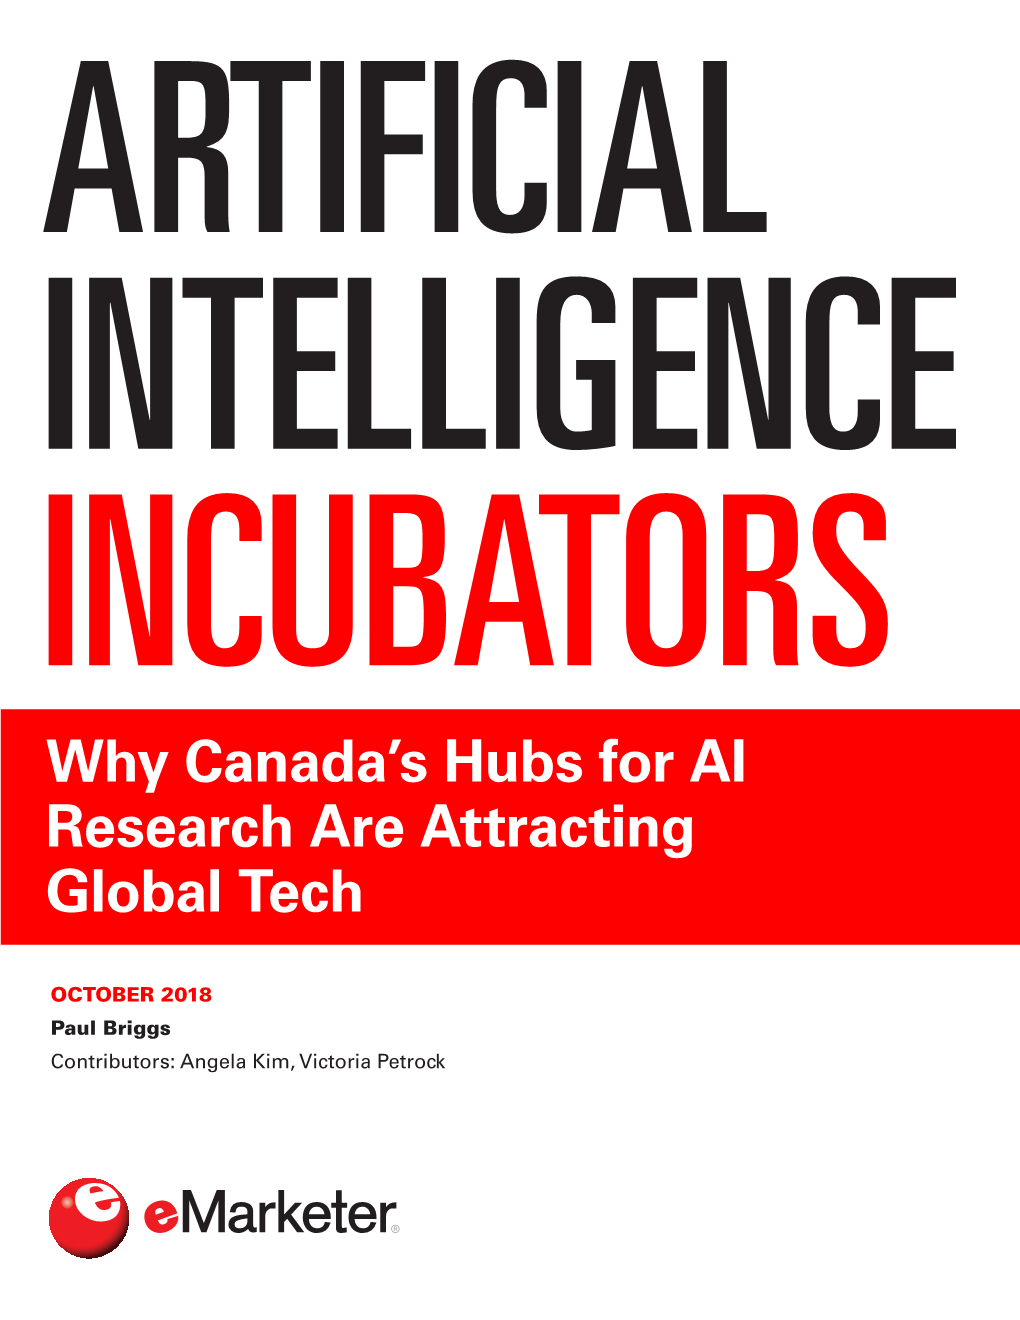 Why Canada's Hubs for AI Research Are Attracting Global Tech